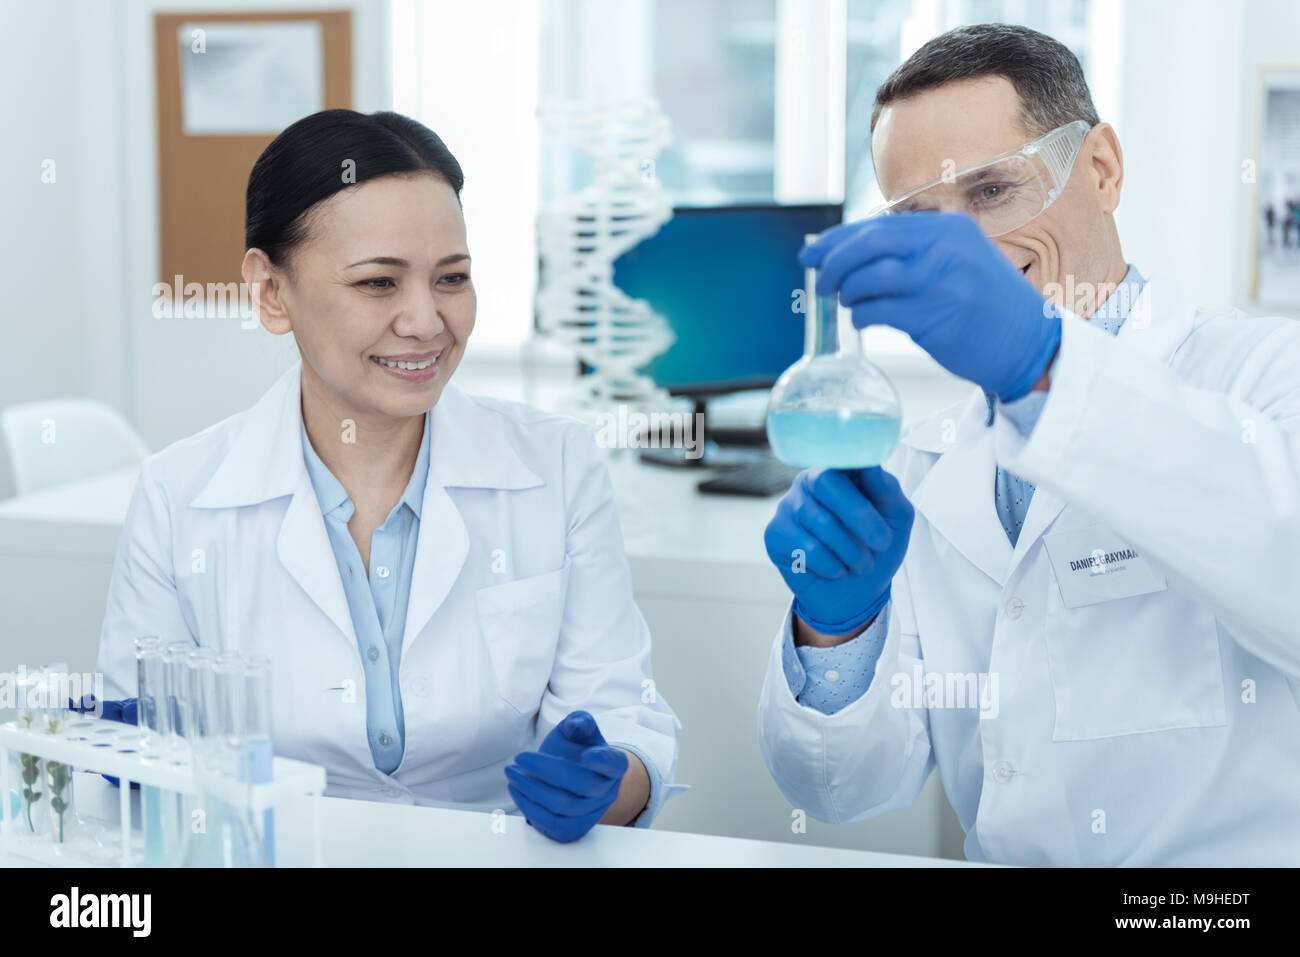 Alert researchers making an experiment in the lab Stock Photo